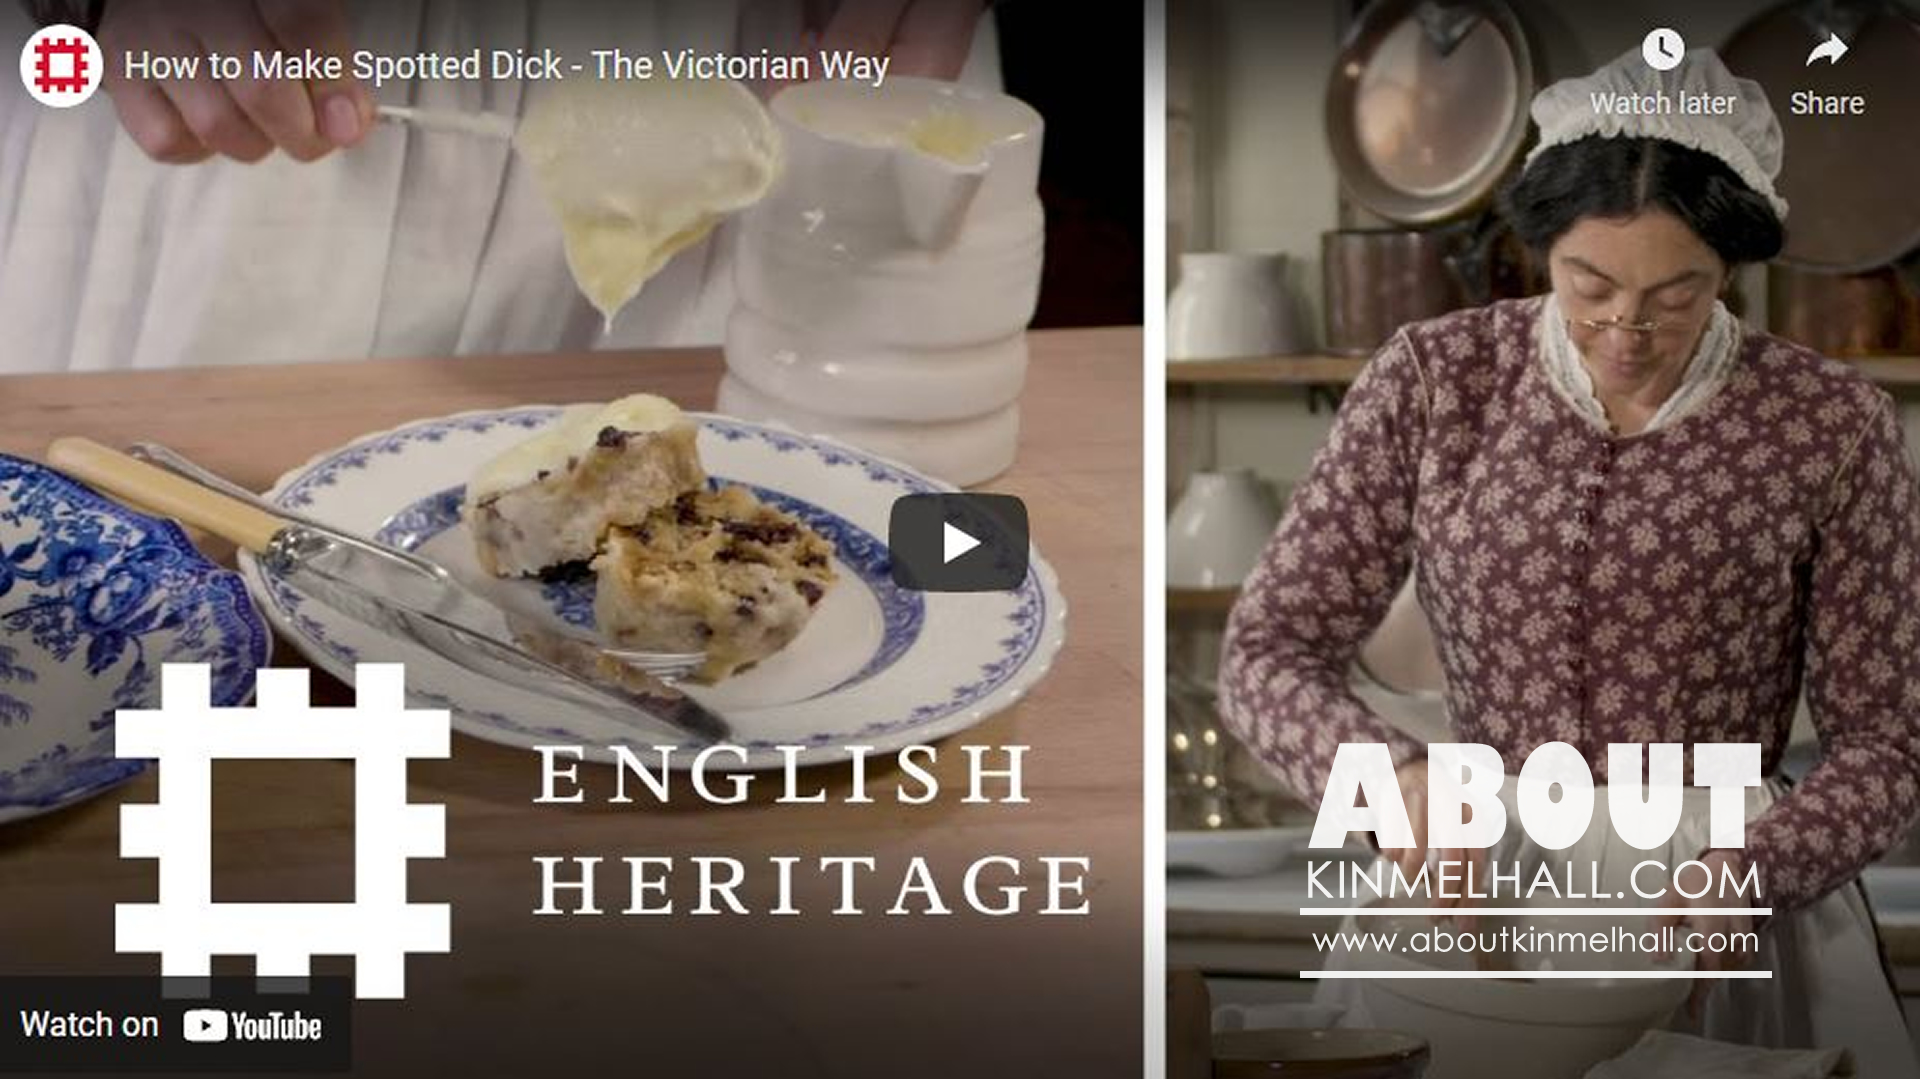 Education Resources - Victorian Cookery Session 13 by English Heritage